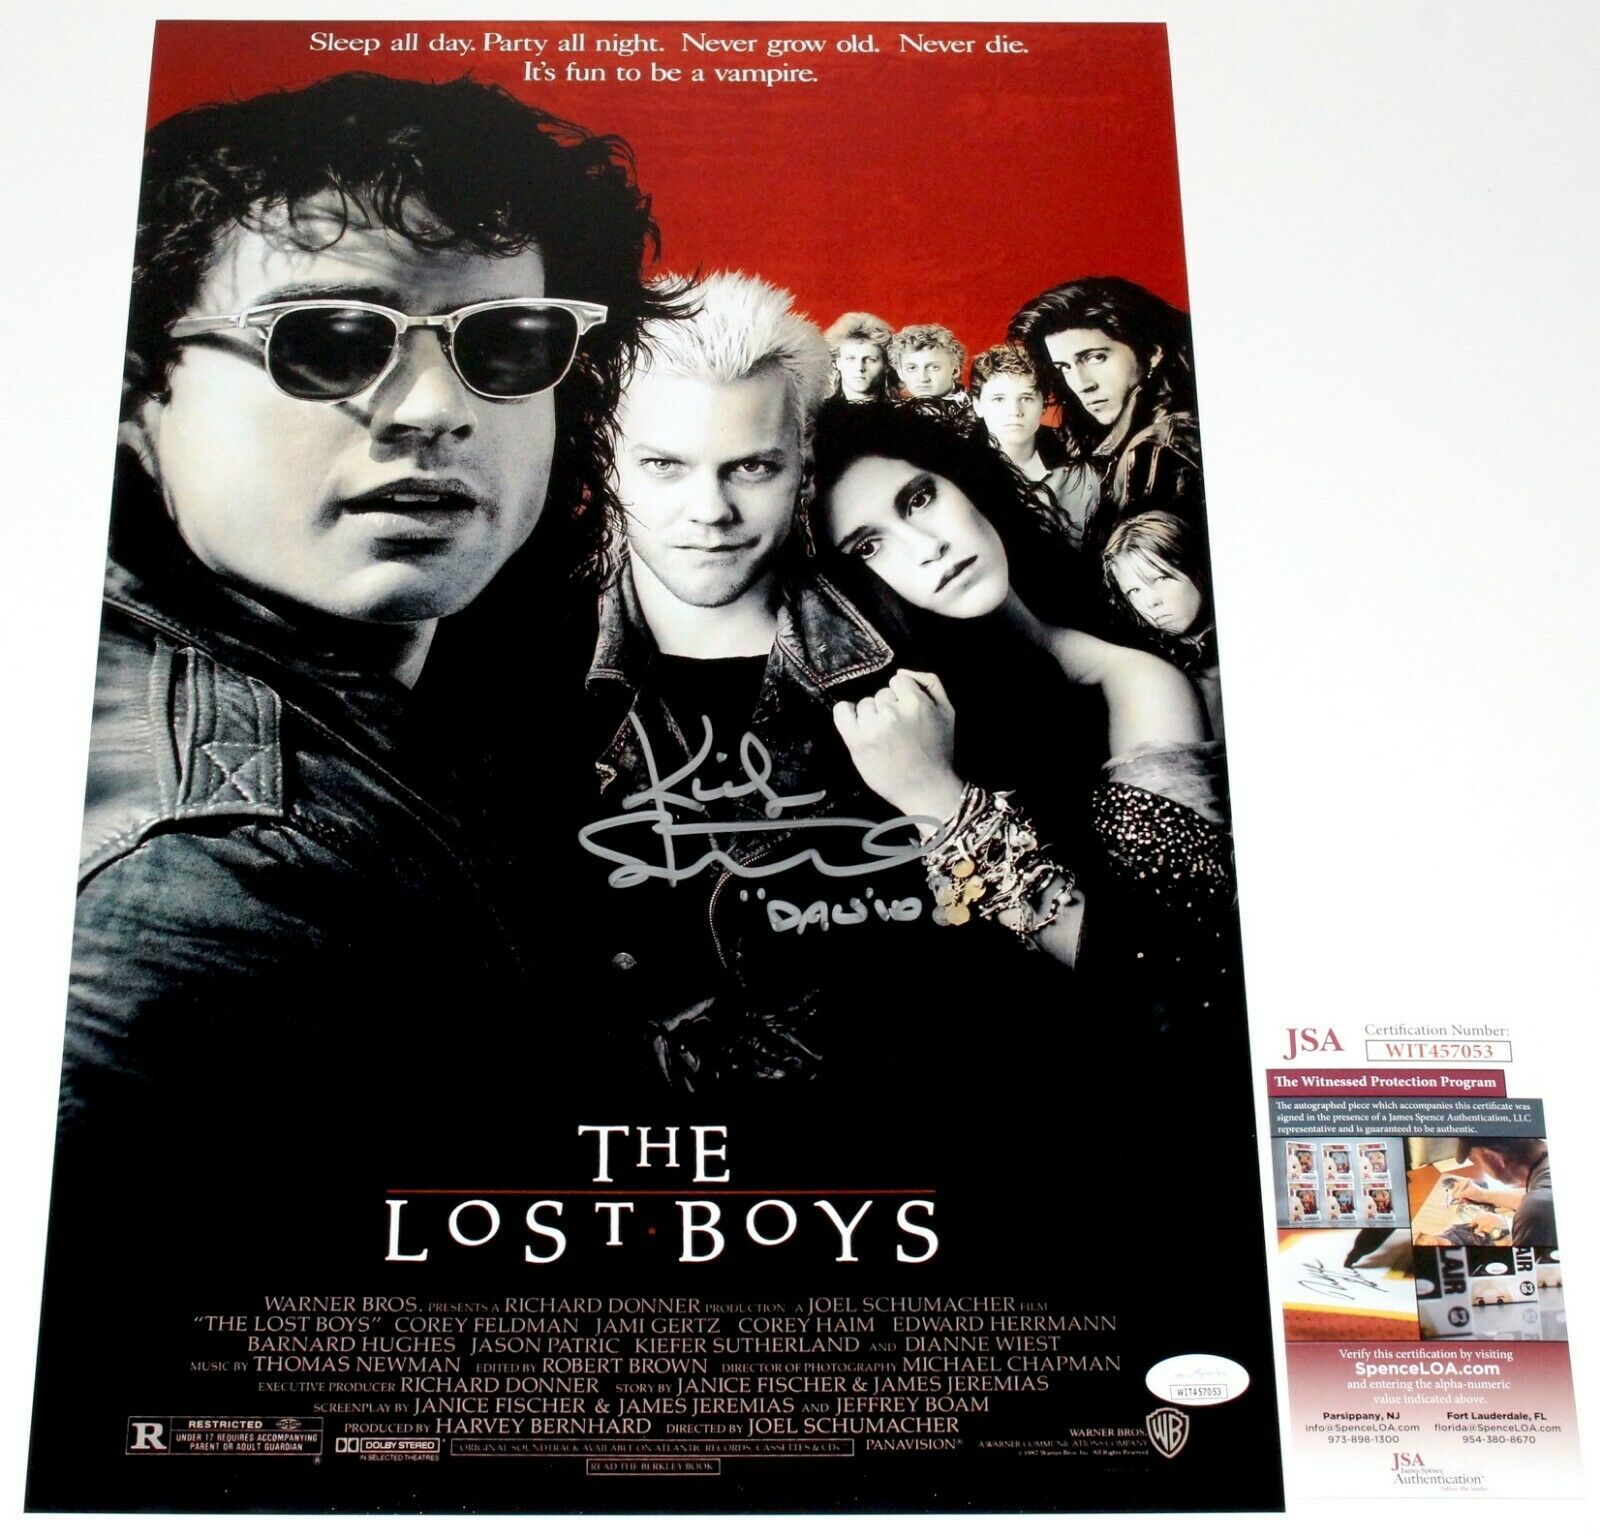 Kiefer Sutherland Signed Authentic 'the Lost Boys' 12x18 Movie Poster Coa Jsa